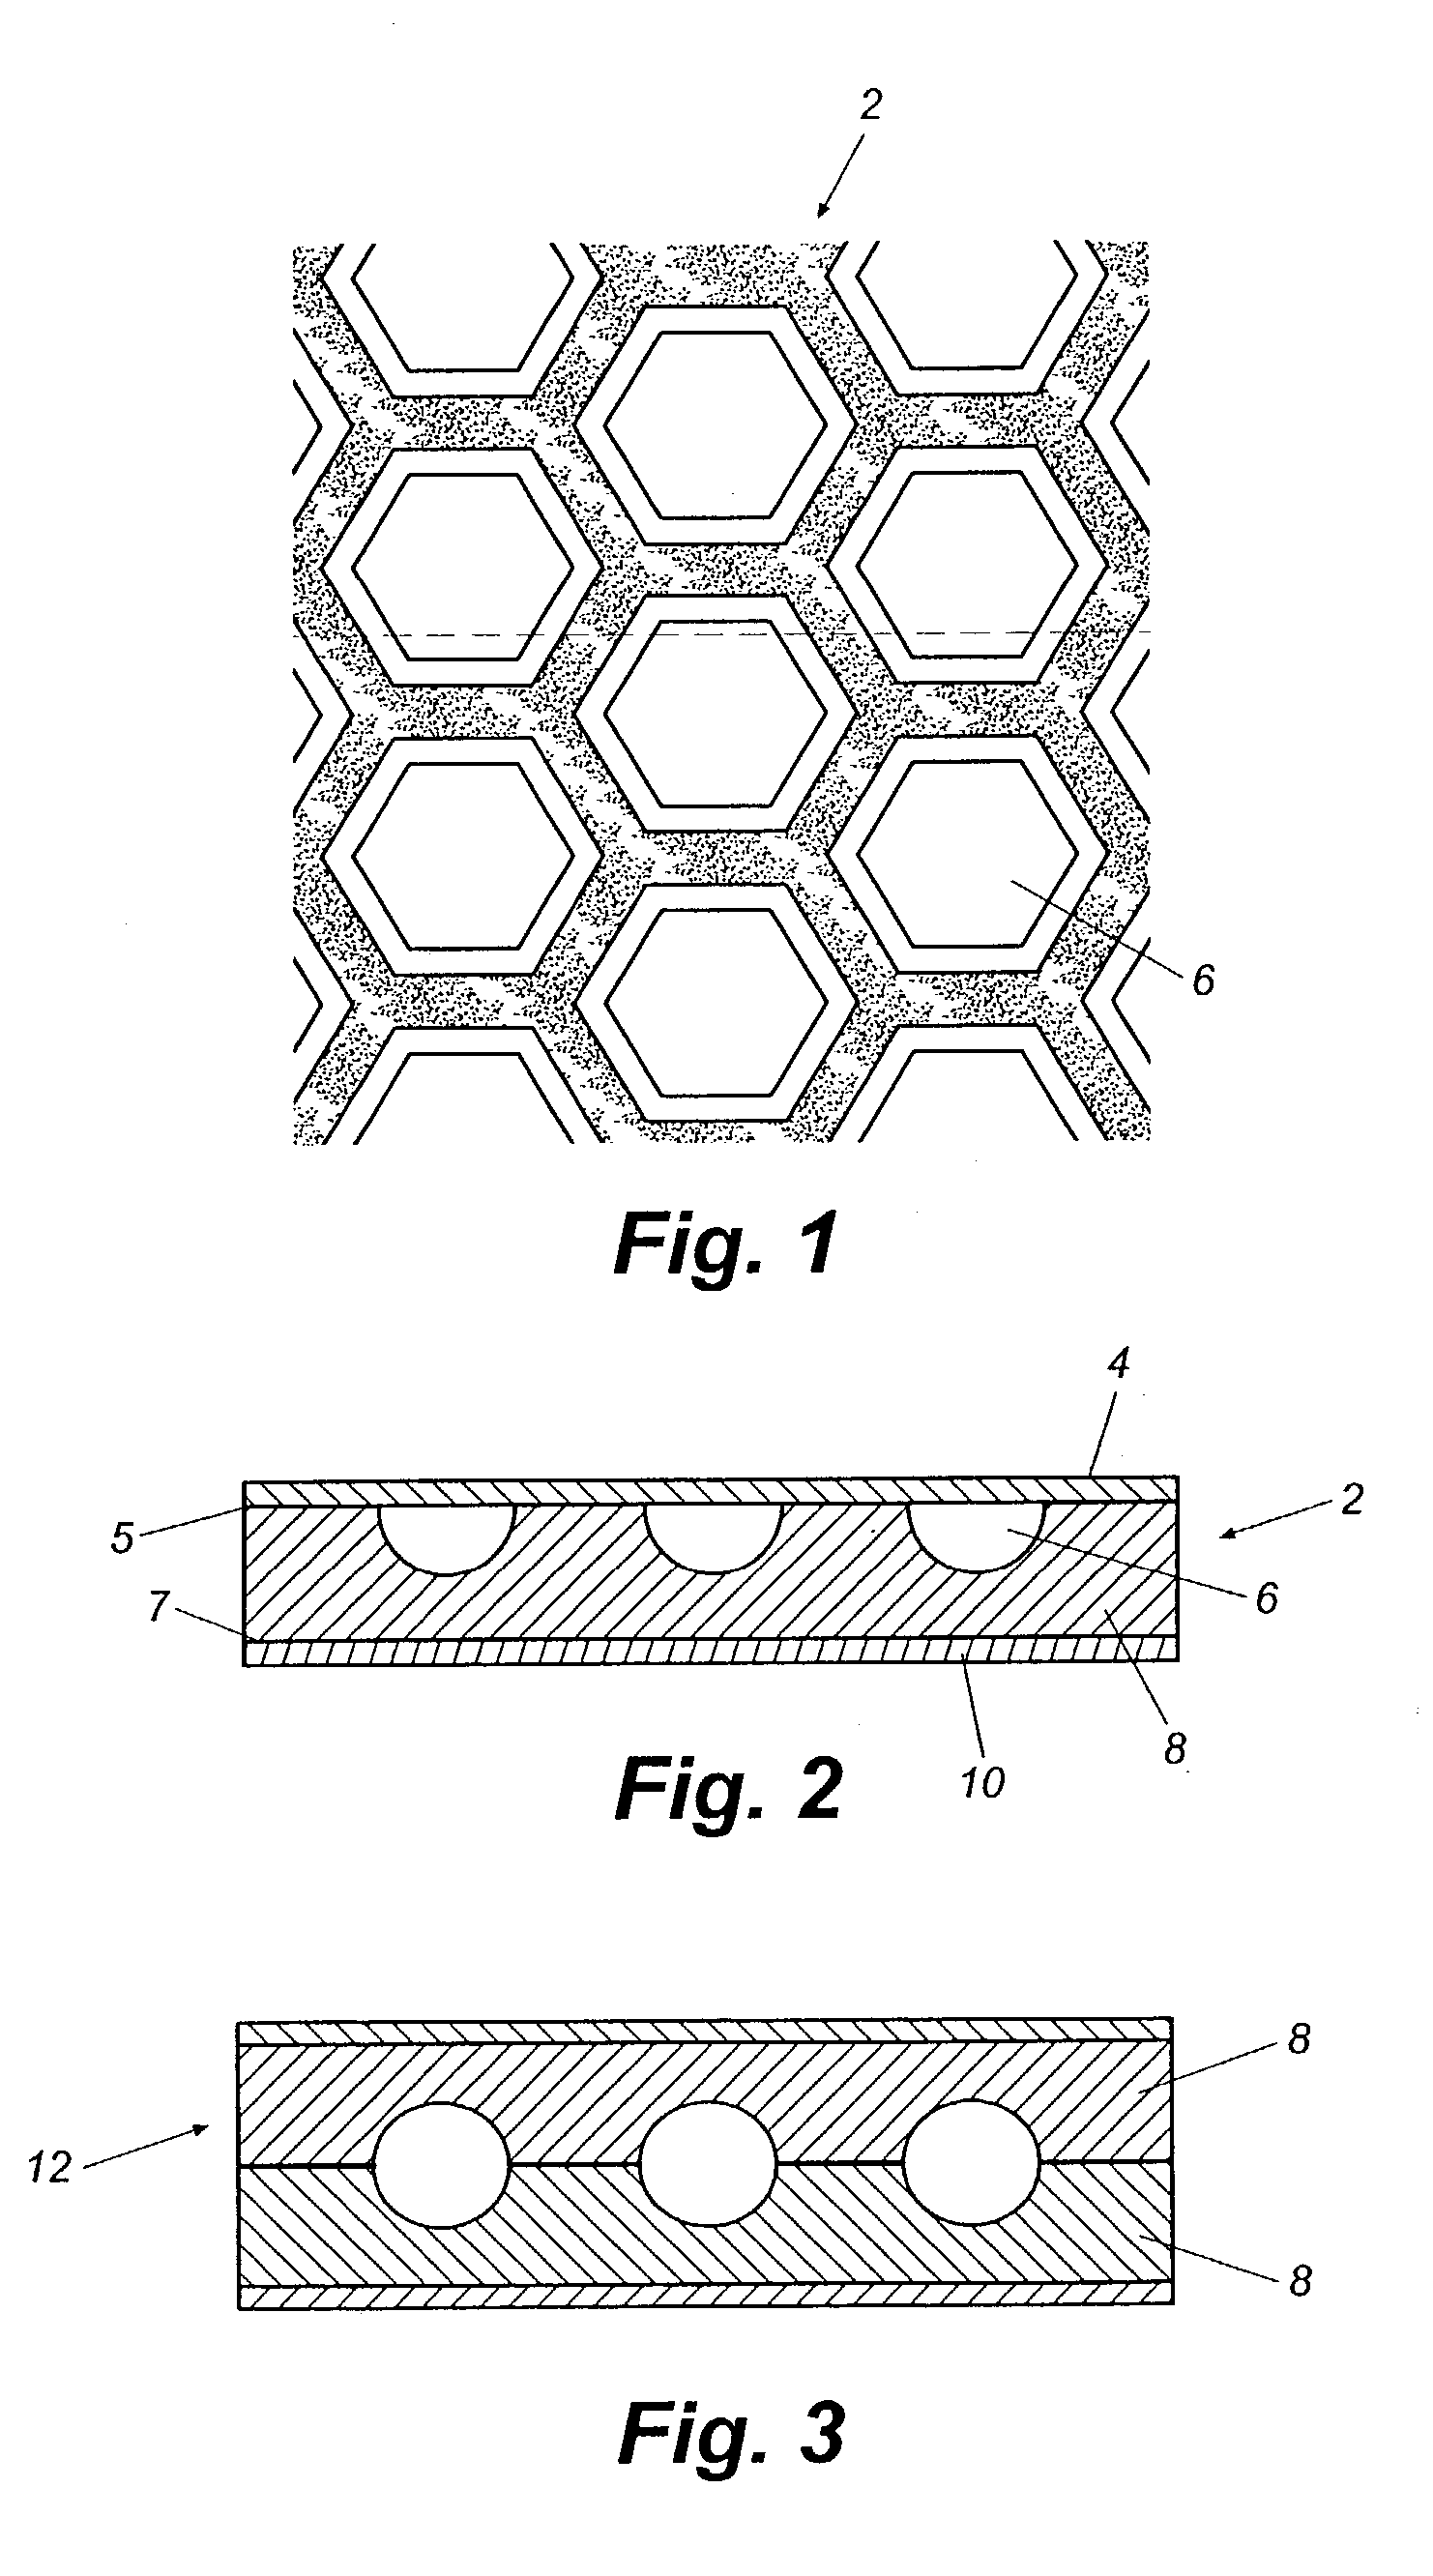 Acoustical panel having a honeycomb structure and method of making the same